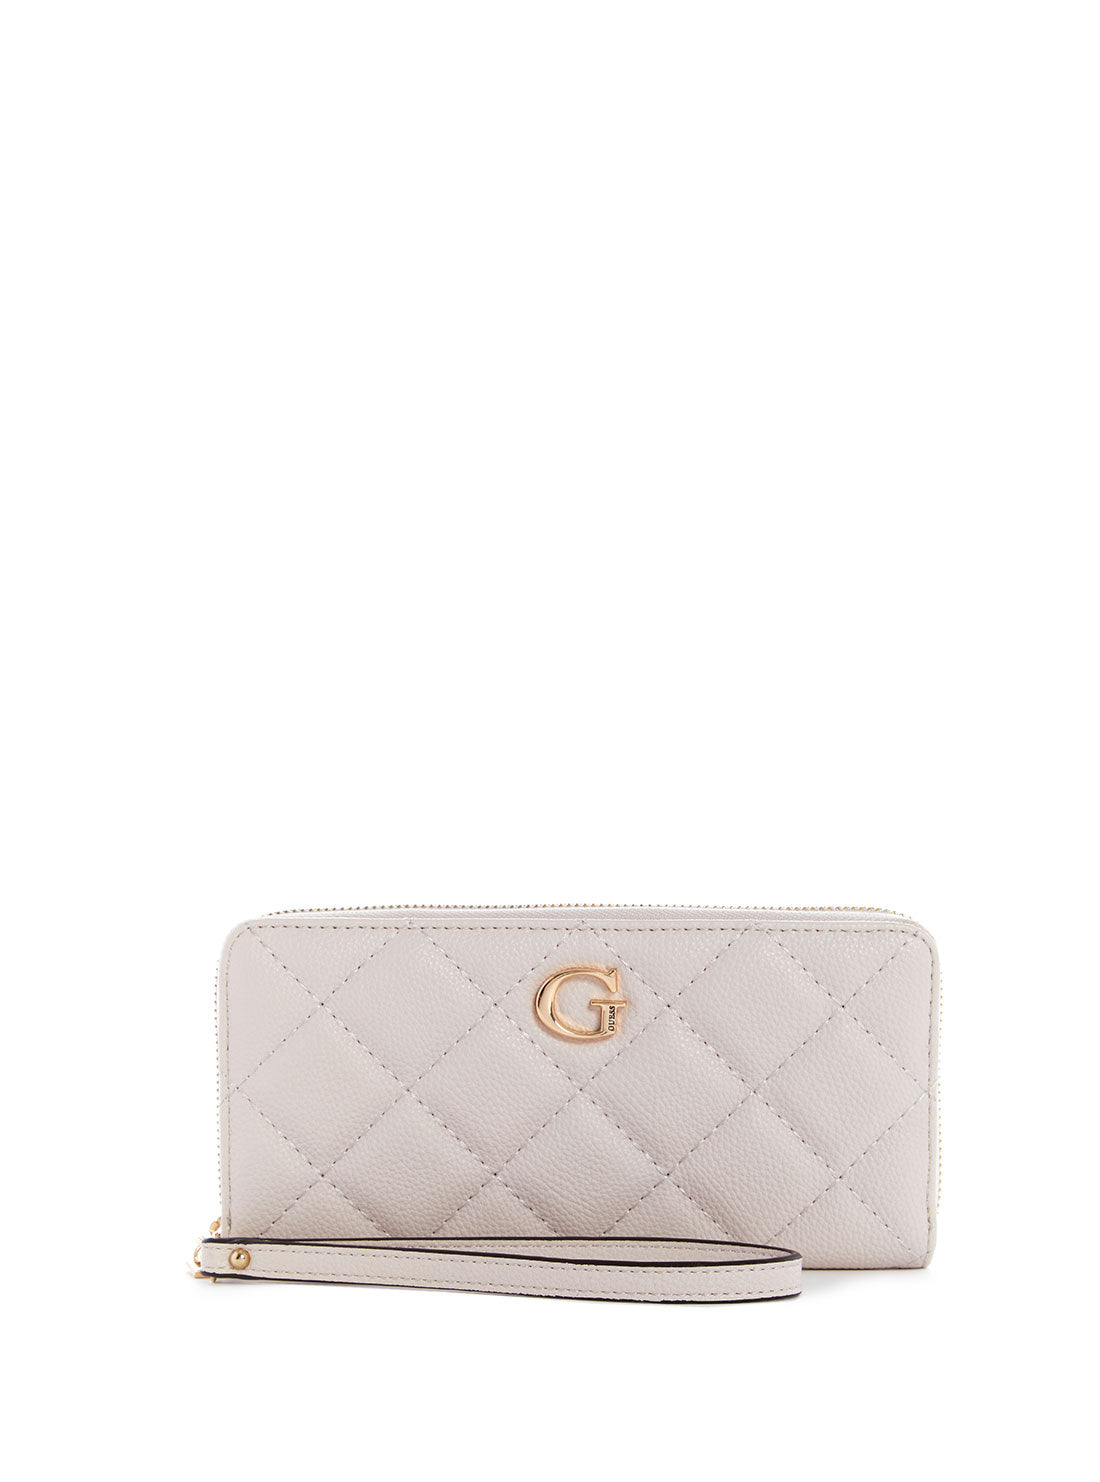 GUESS Womens Cream Quilted Gillian Large Wallet QG839446 Front View